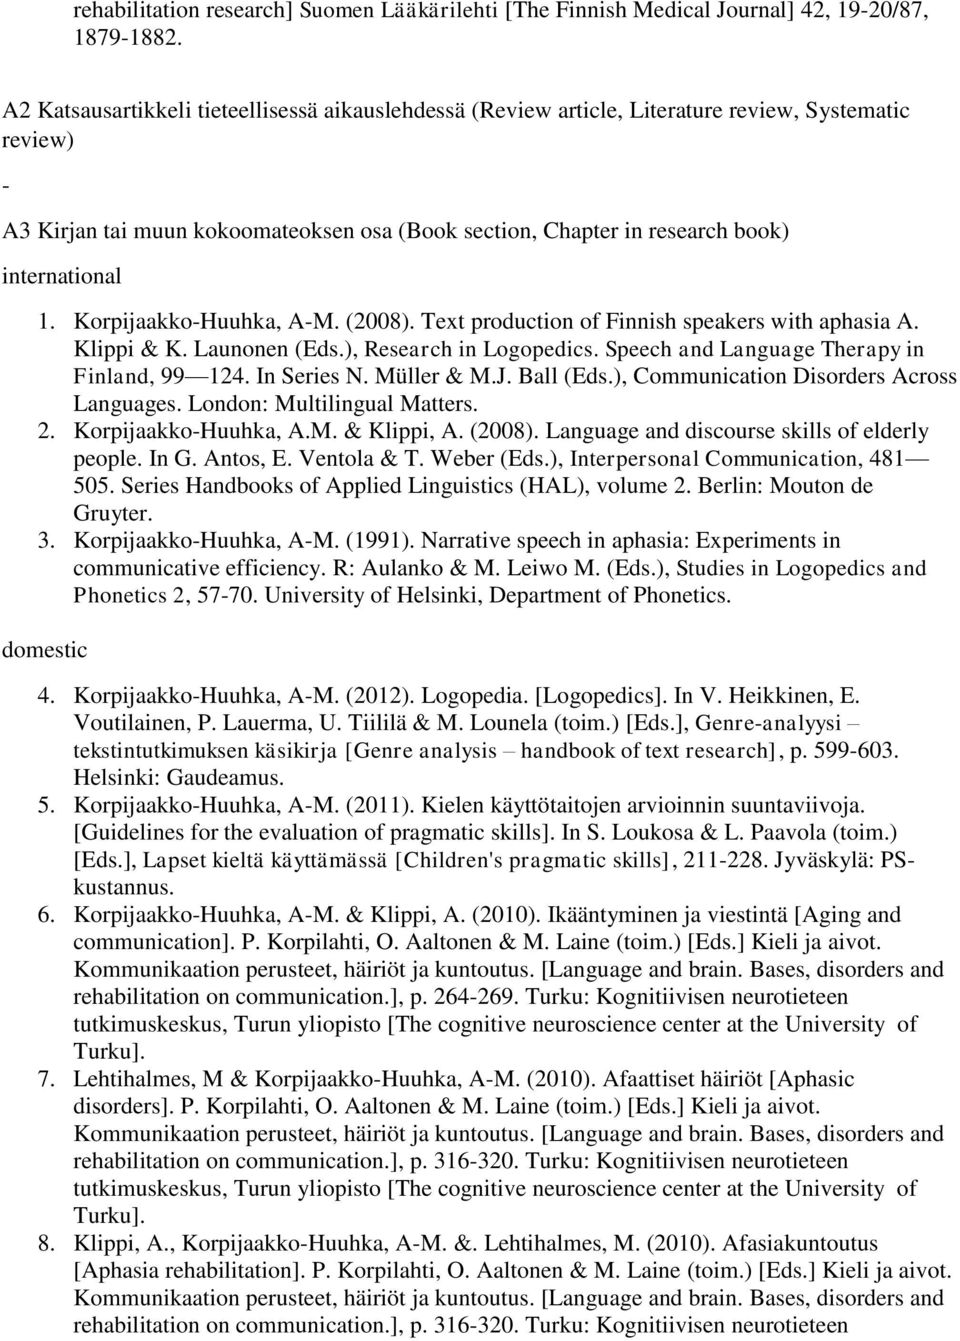 1. Korpijaakko-Huuhka, A-M. (2008). Text production of Finnish speakers with aphasia A. Klippi & K. Launonen (Eds.), Research in Logopedics. Speech and Language Therapy in Finland, 99 124.